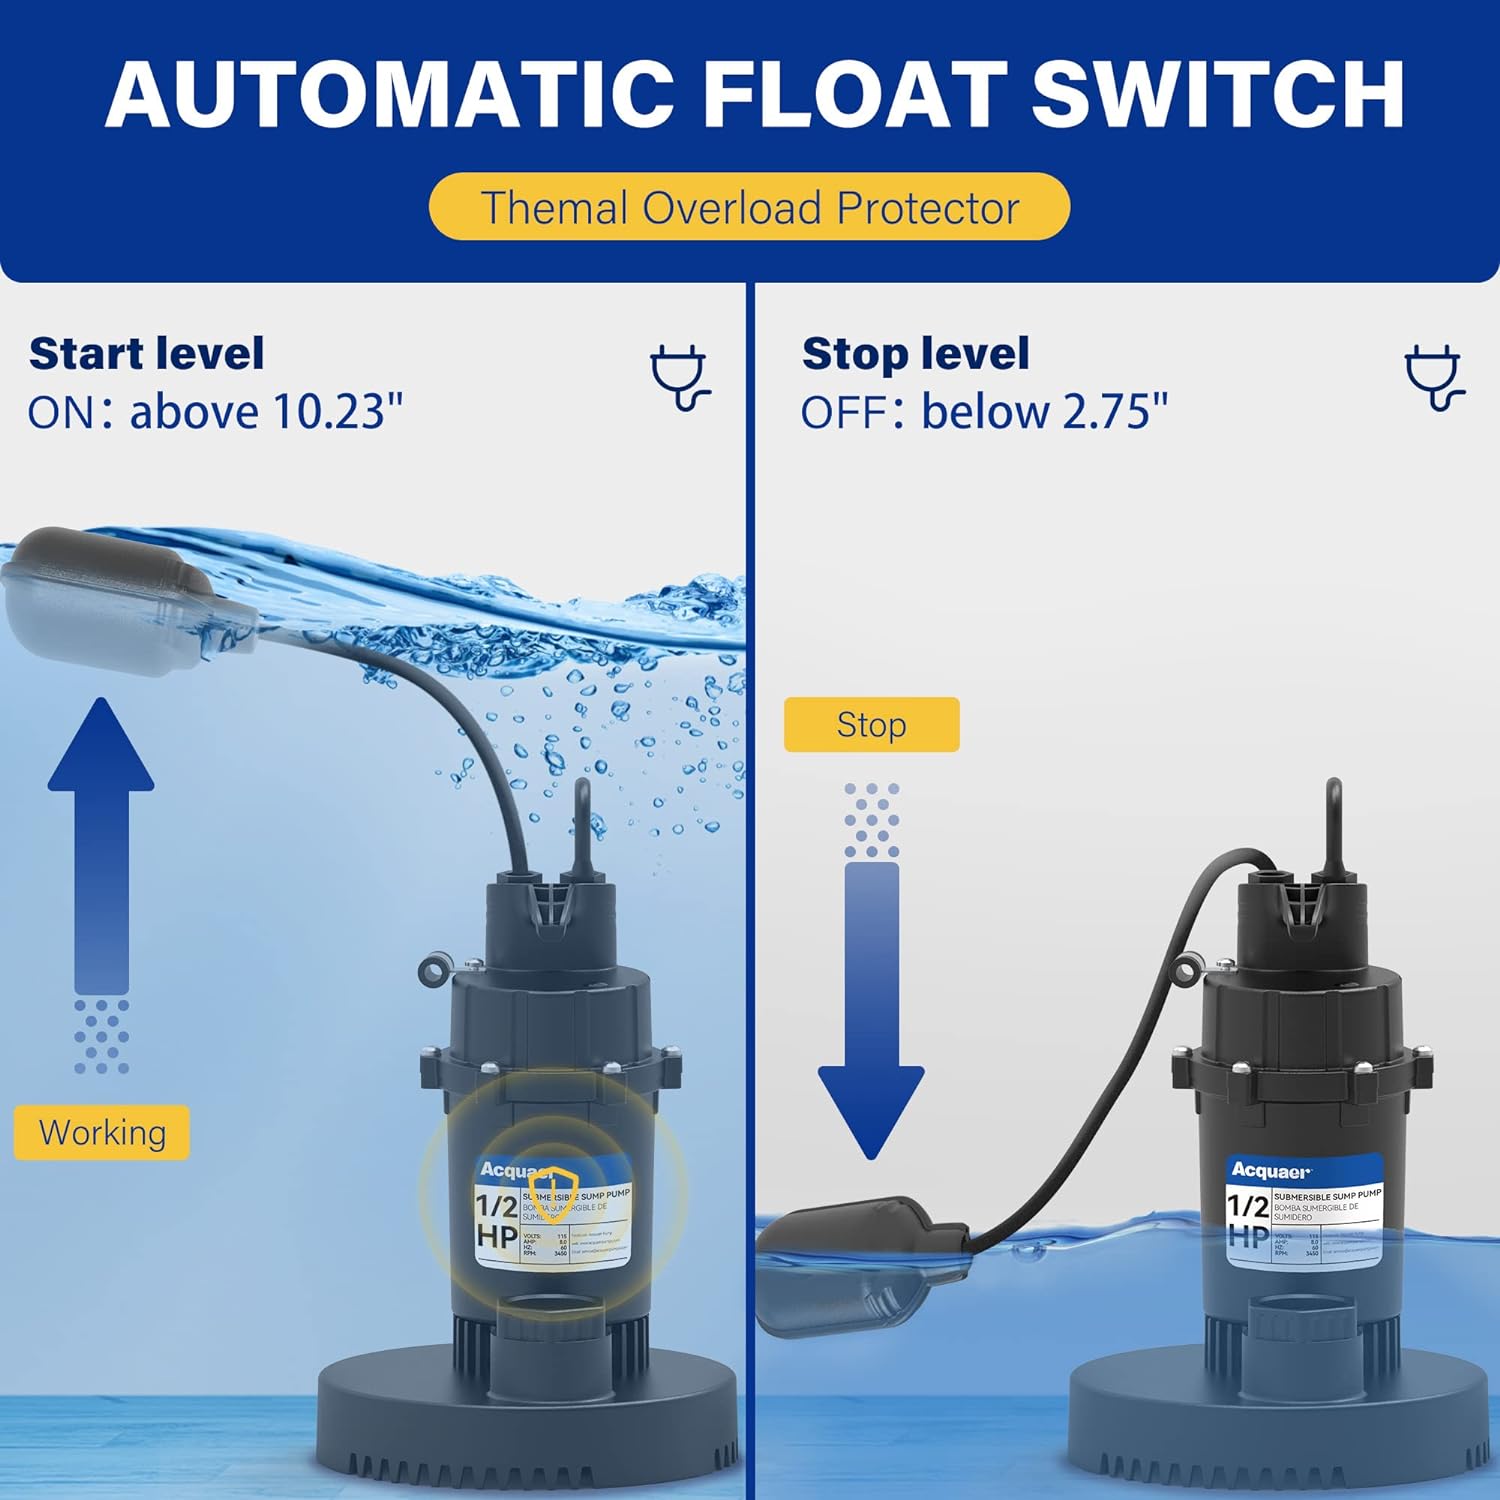 Acquaer 1/2HP Sump Pump, 4060GPH Submersible Clean/Dirty Water Pump with Adjustable Float Switch for Garden Pool, Basement, Flooded Hou